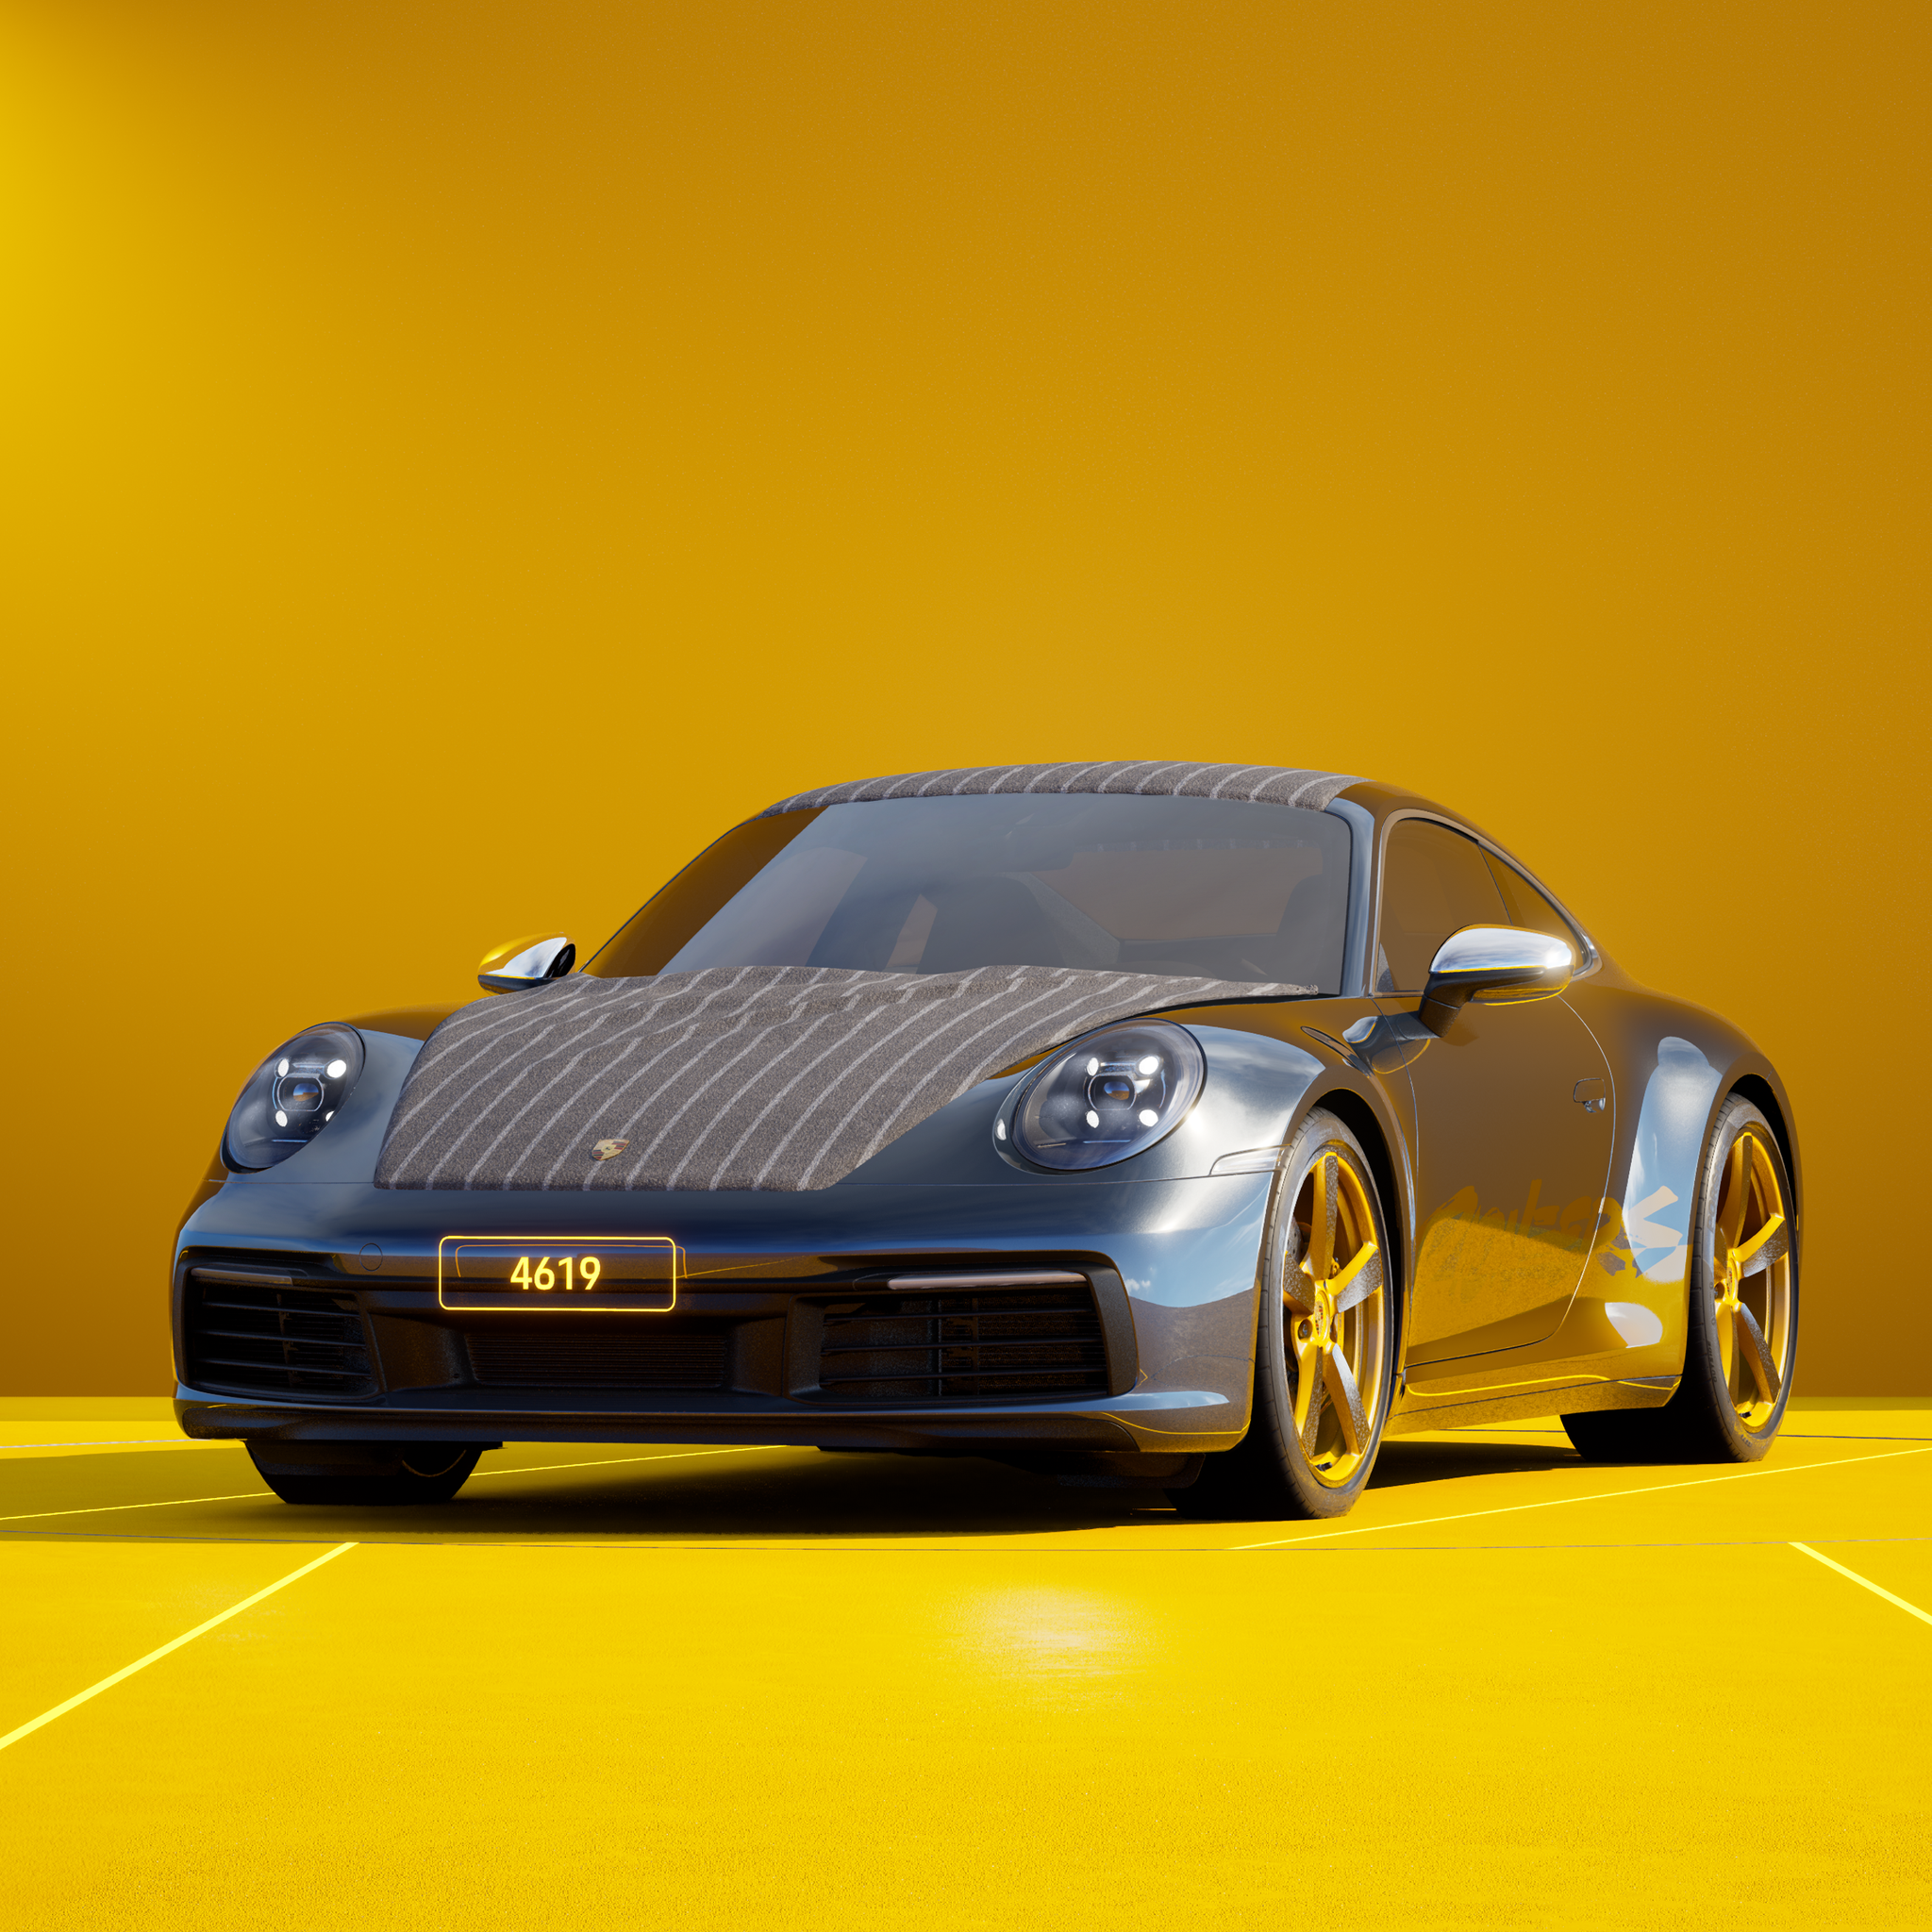 The PORSCHΞ 911 4619 image in phase